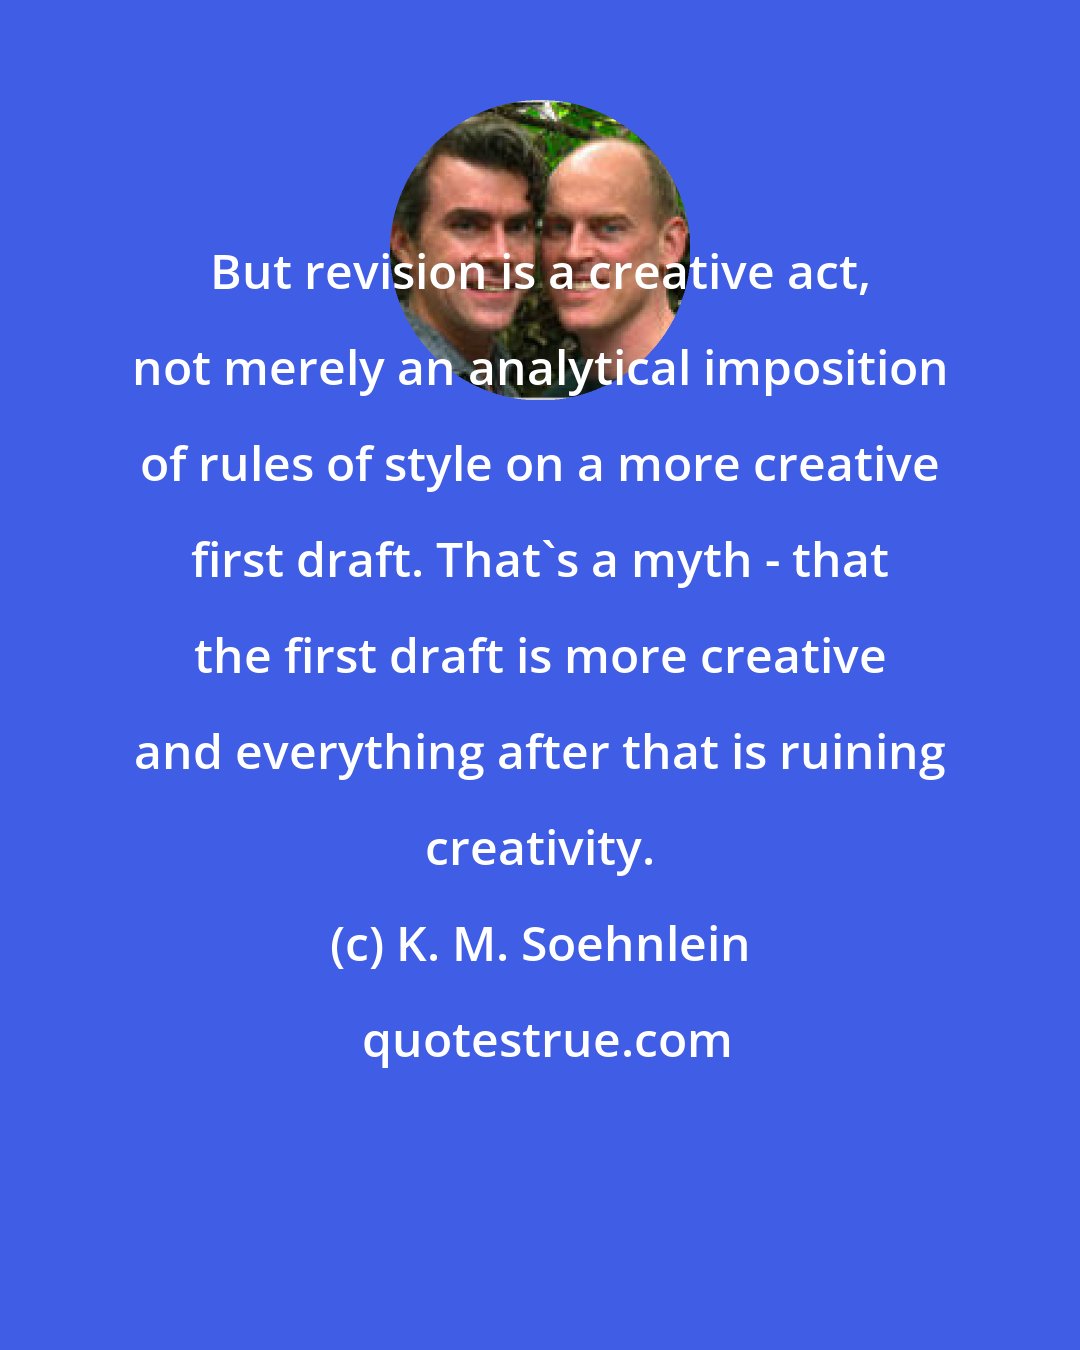 K. M. Soehnlein: But revision is a creative act, not merely an analytical imposition of rules of style on a more creative first draft. That's a myth - that the first draft is more creative and everything after that is ruining creativity.